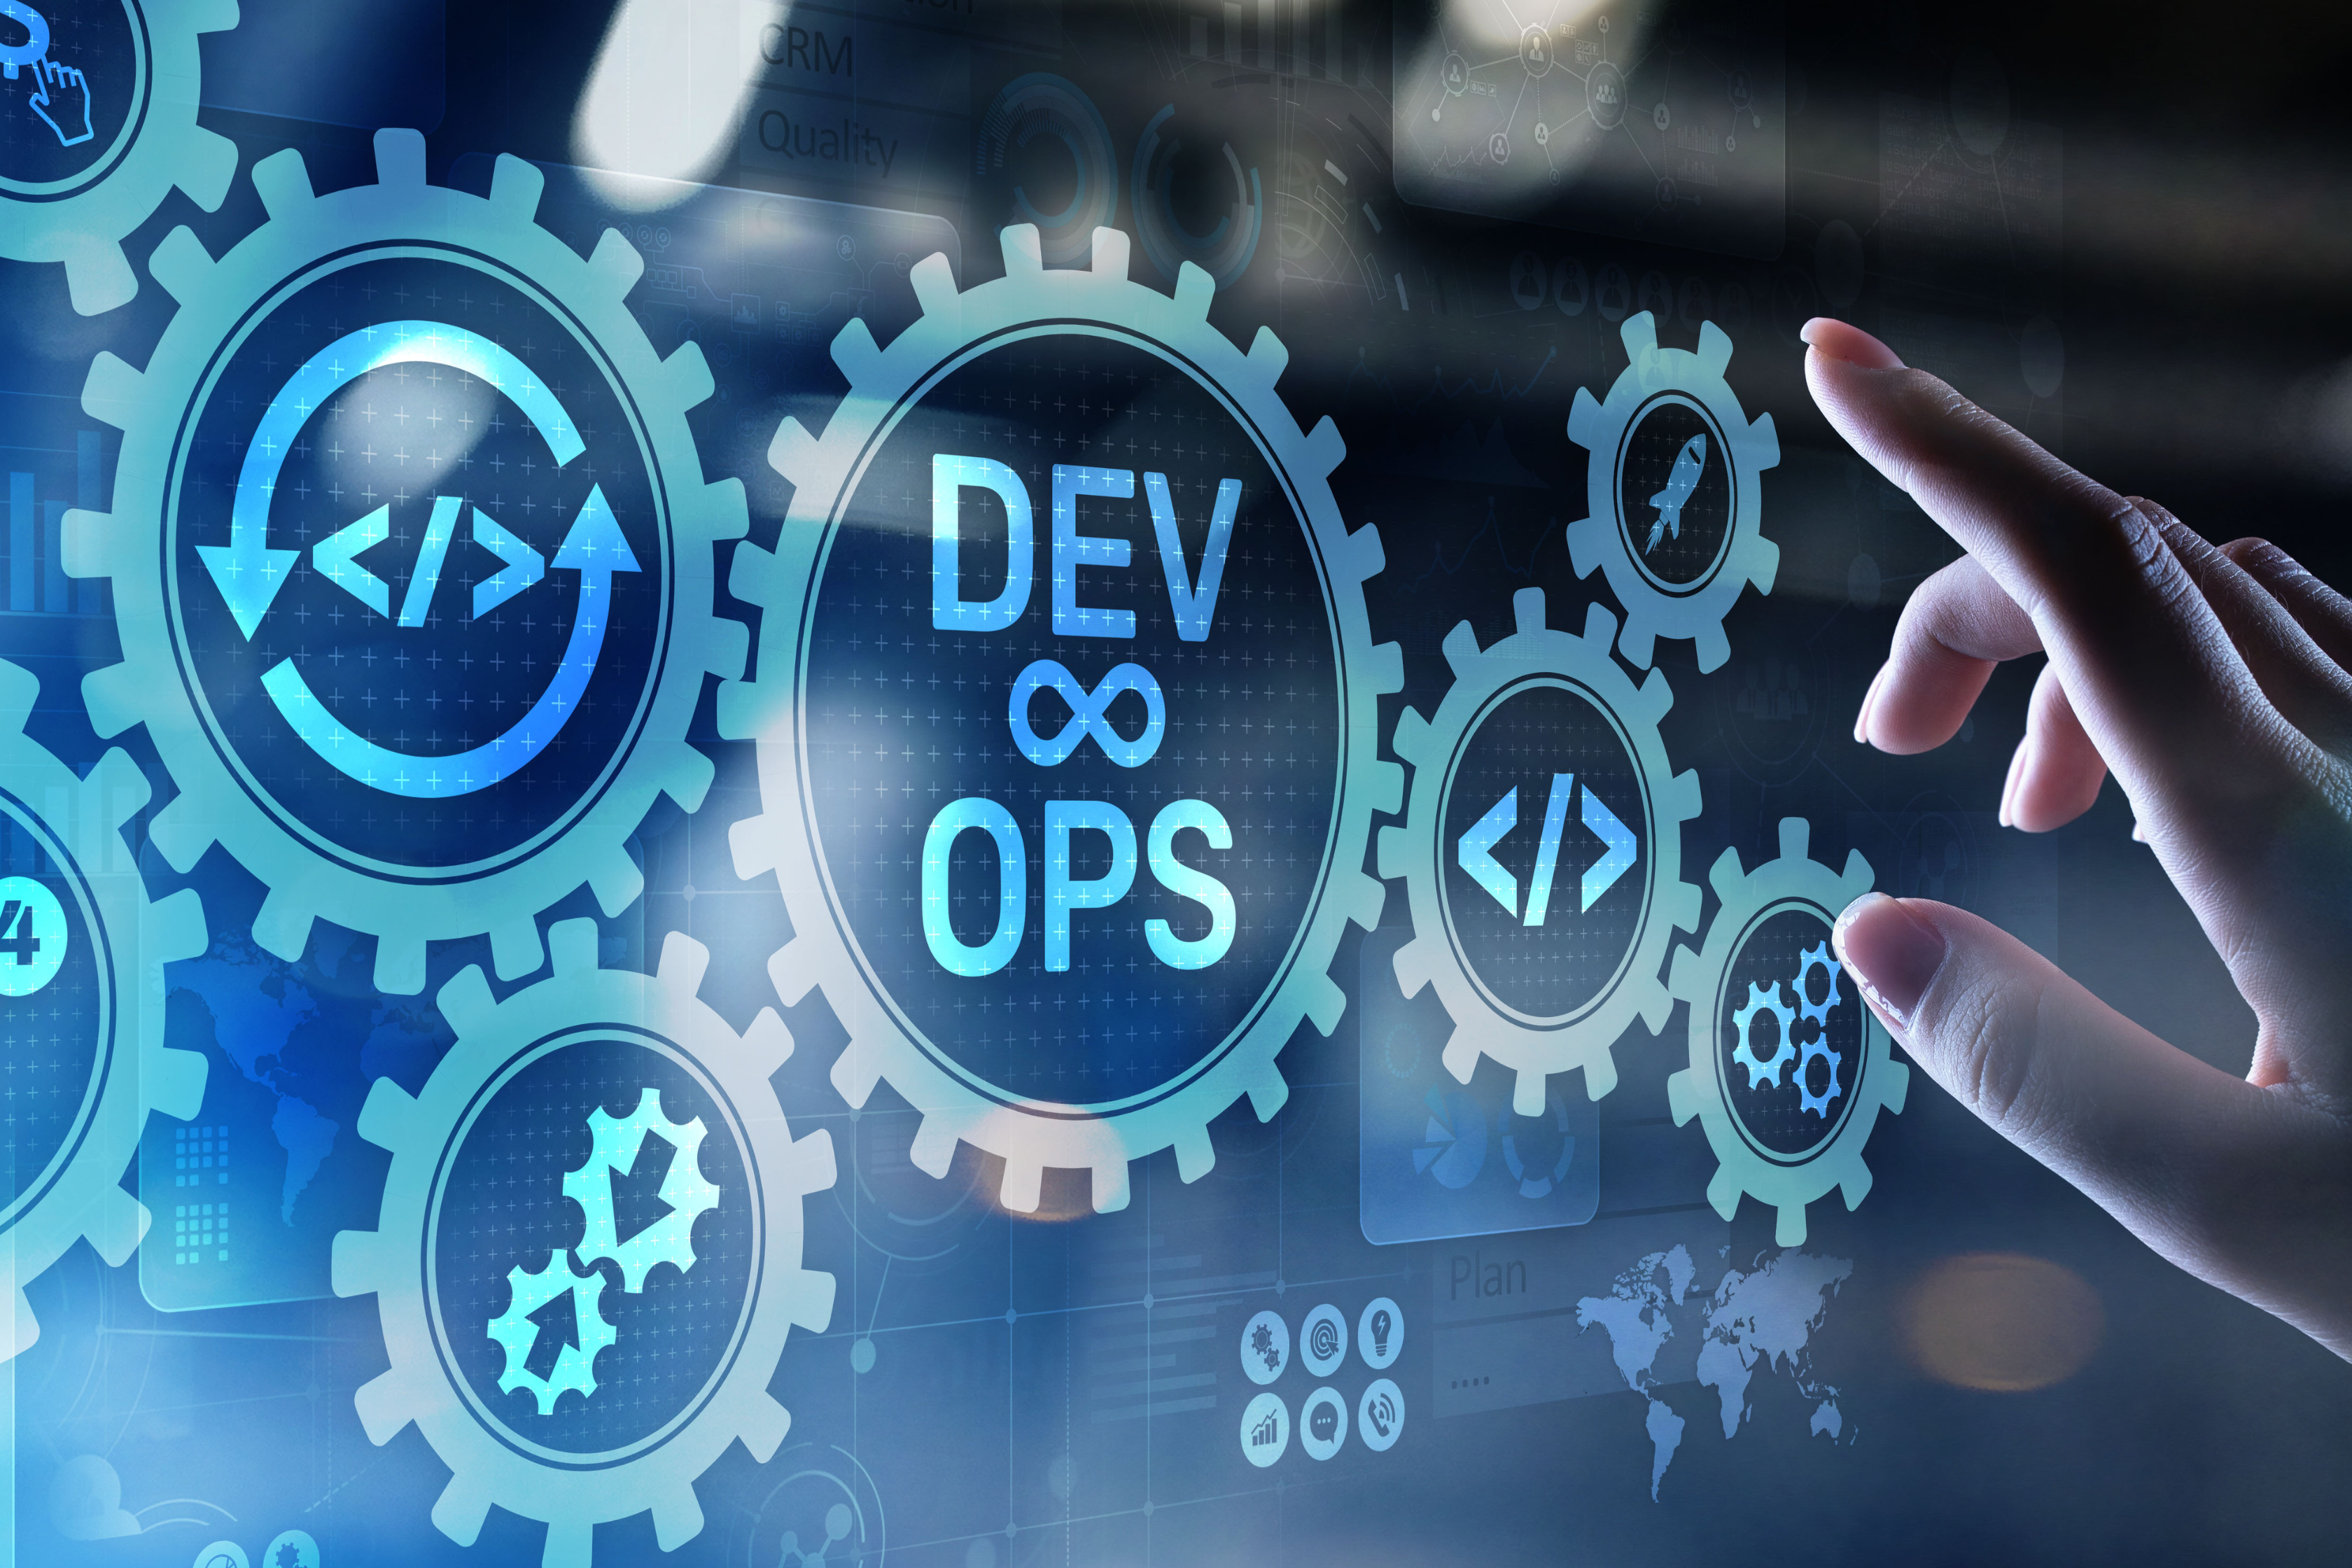 Discover the DevOps trends that will continue to grow and improve the industry as it stands today and prepare for success in the new year.